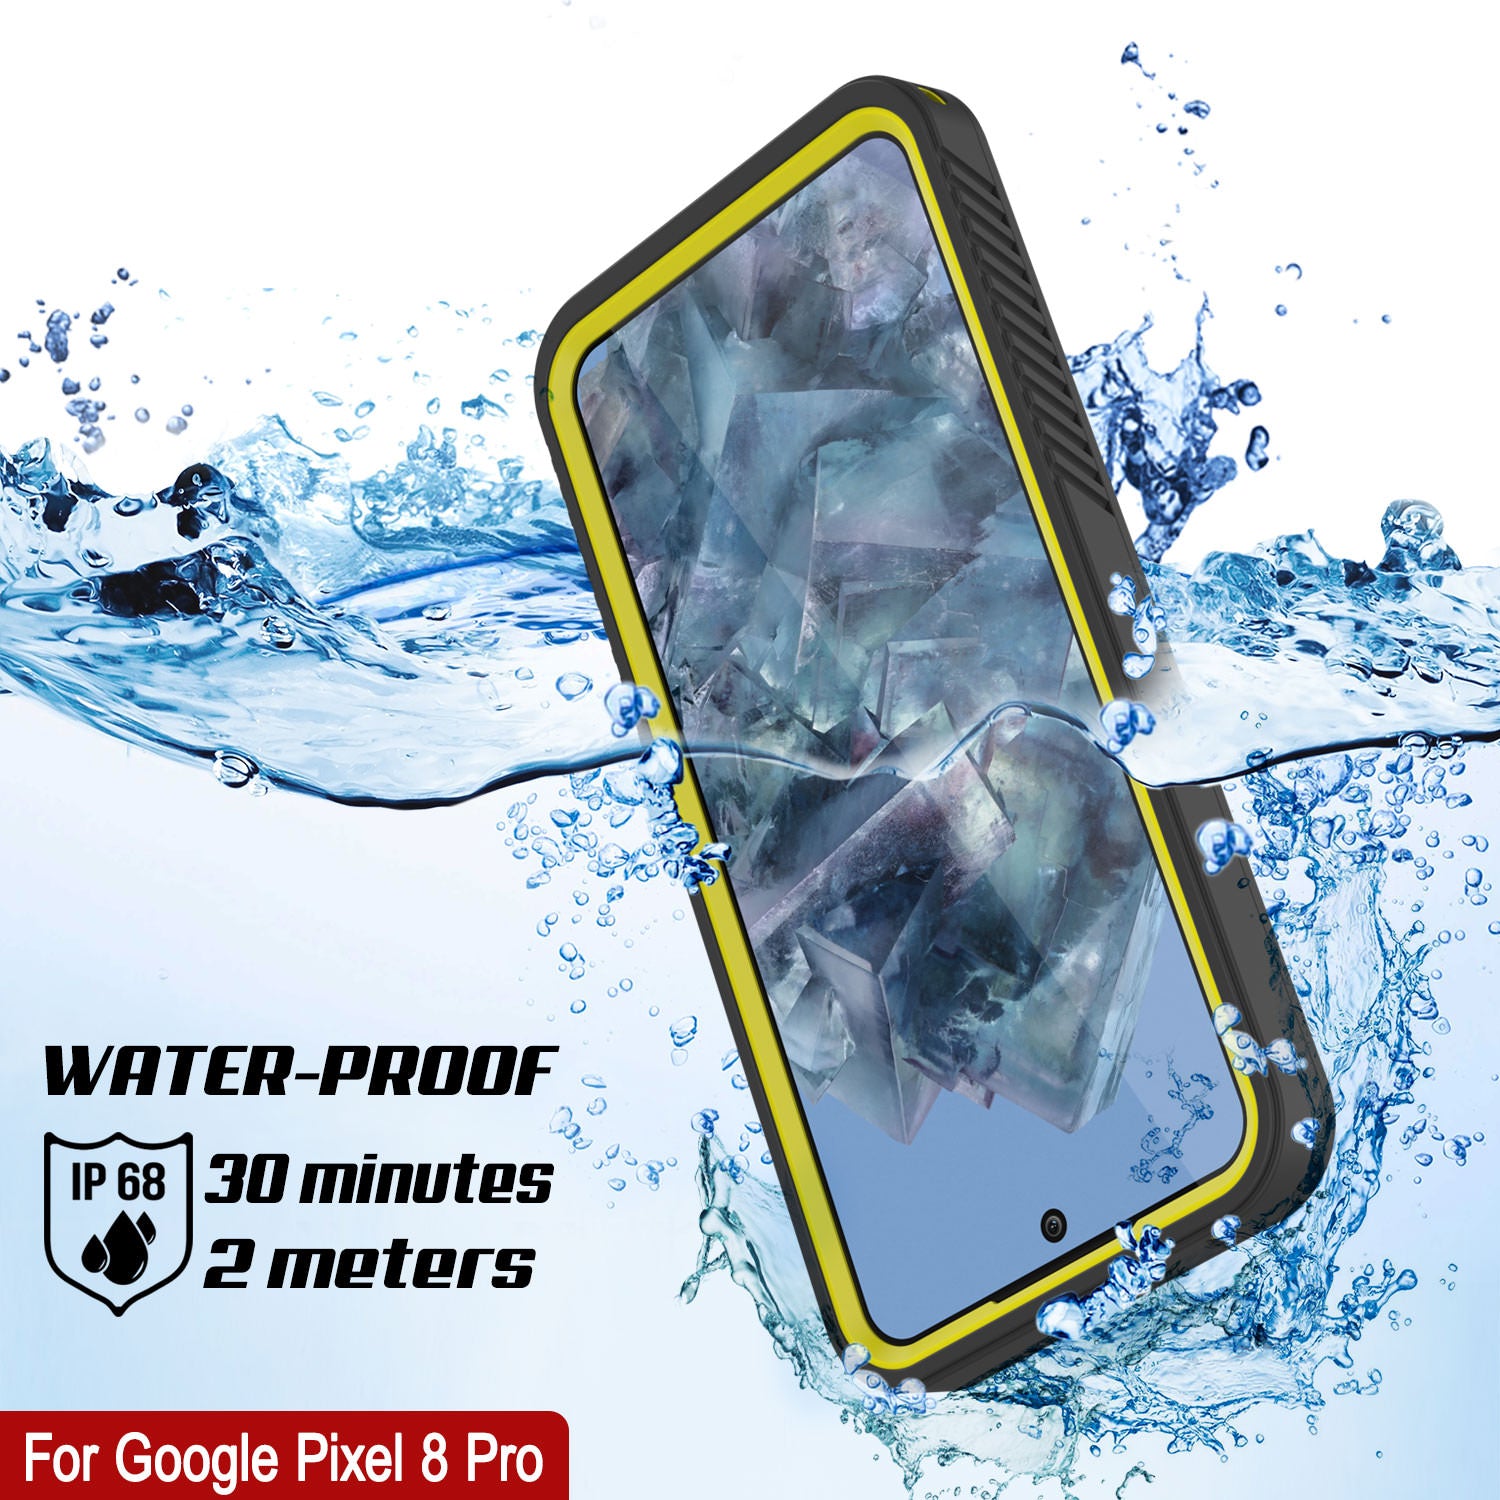 Google Pixel 8 Pro Waterproof Case, Punkcase [Extreme Series] Armor Cover W/ Built In Screen Protector [Navy Blue] - Black